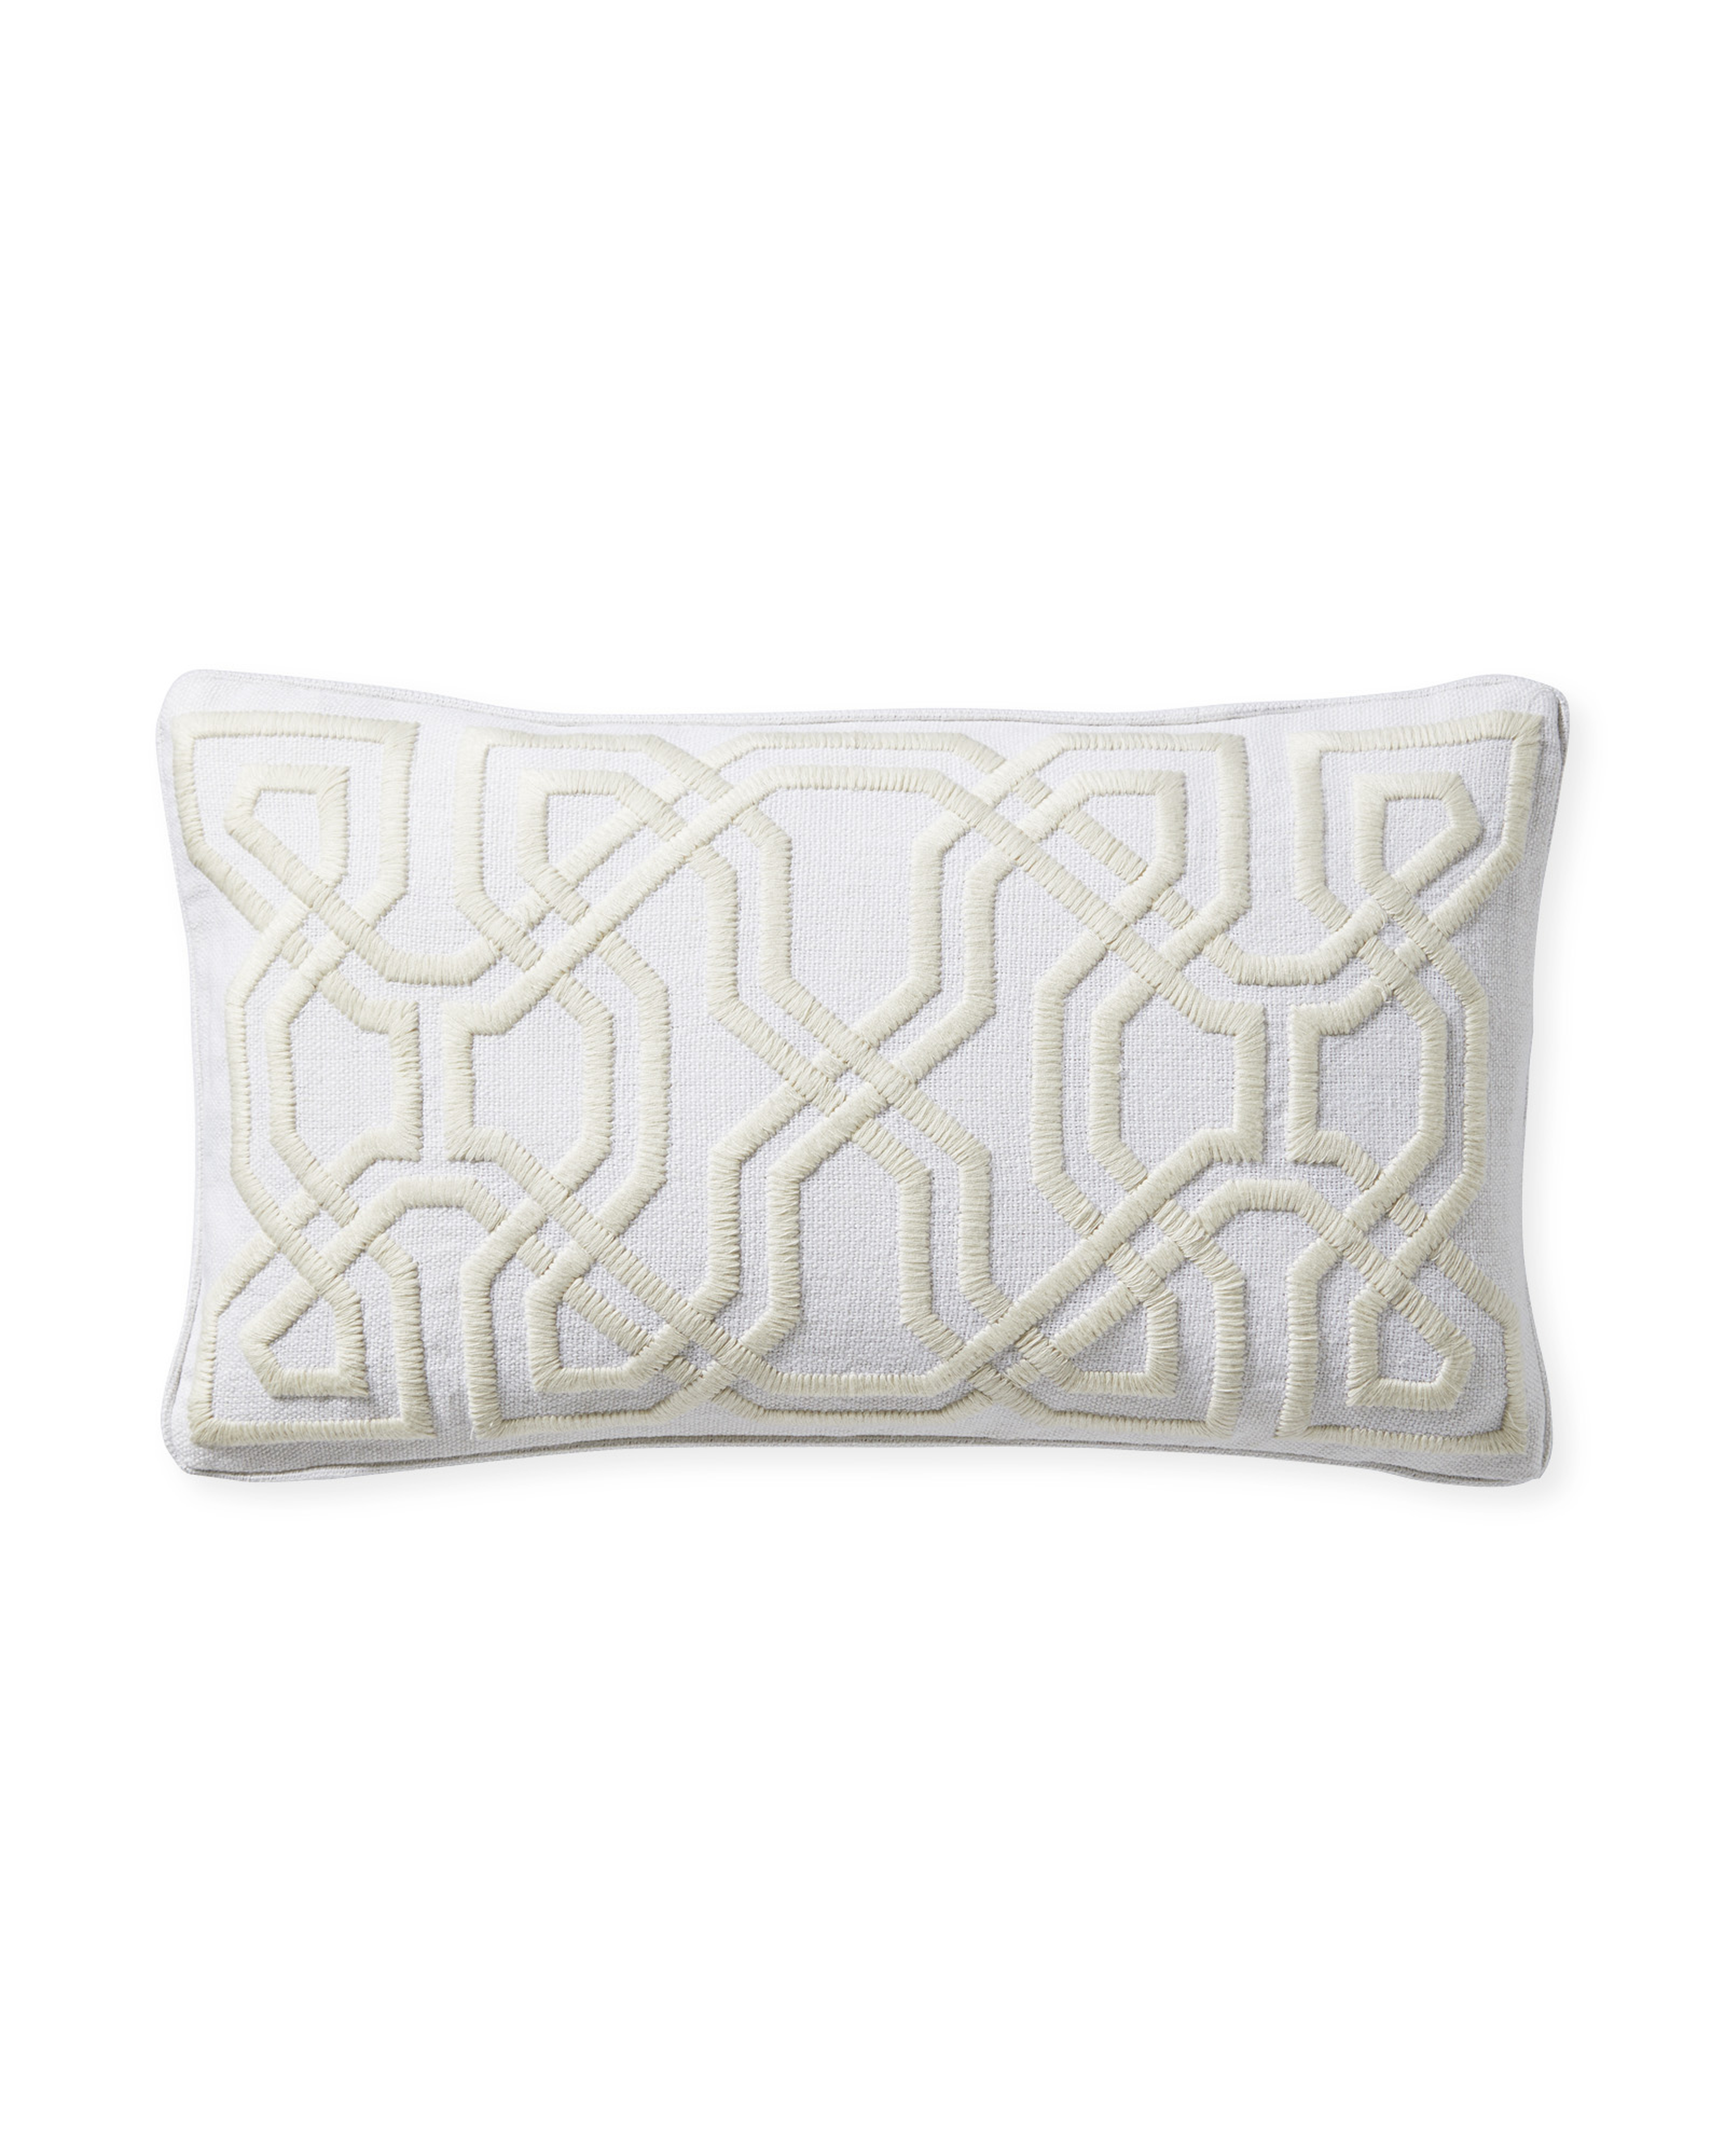 Jetty Pillow Cover - Ivory - Insert sold separately - Serena and Lily